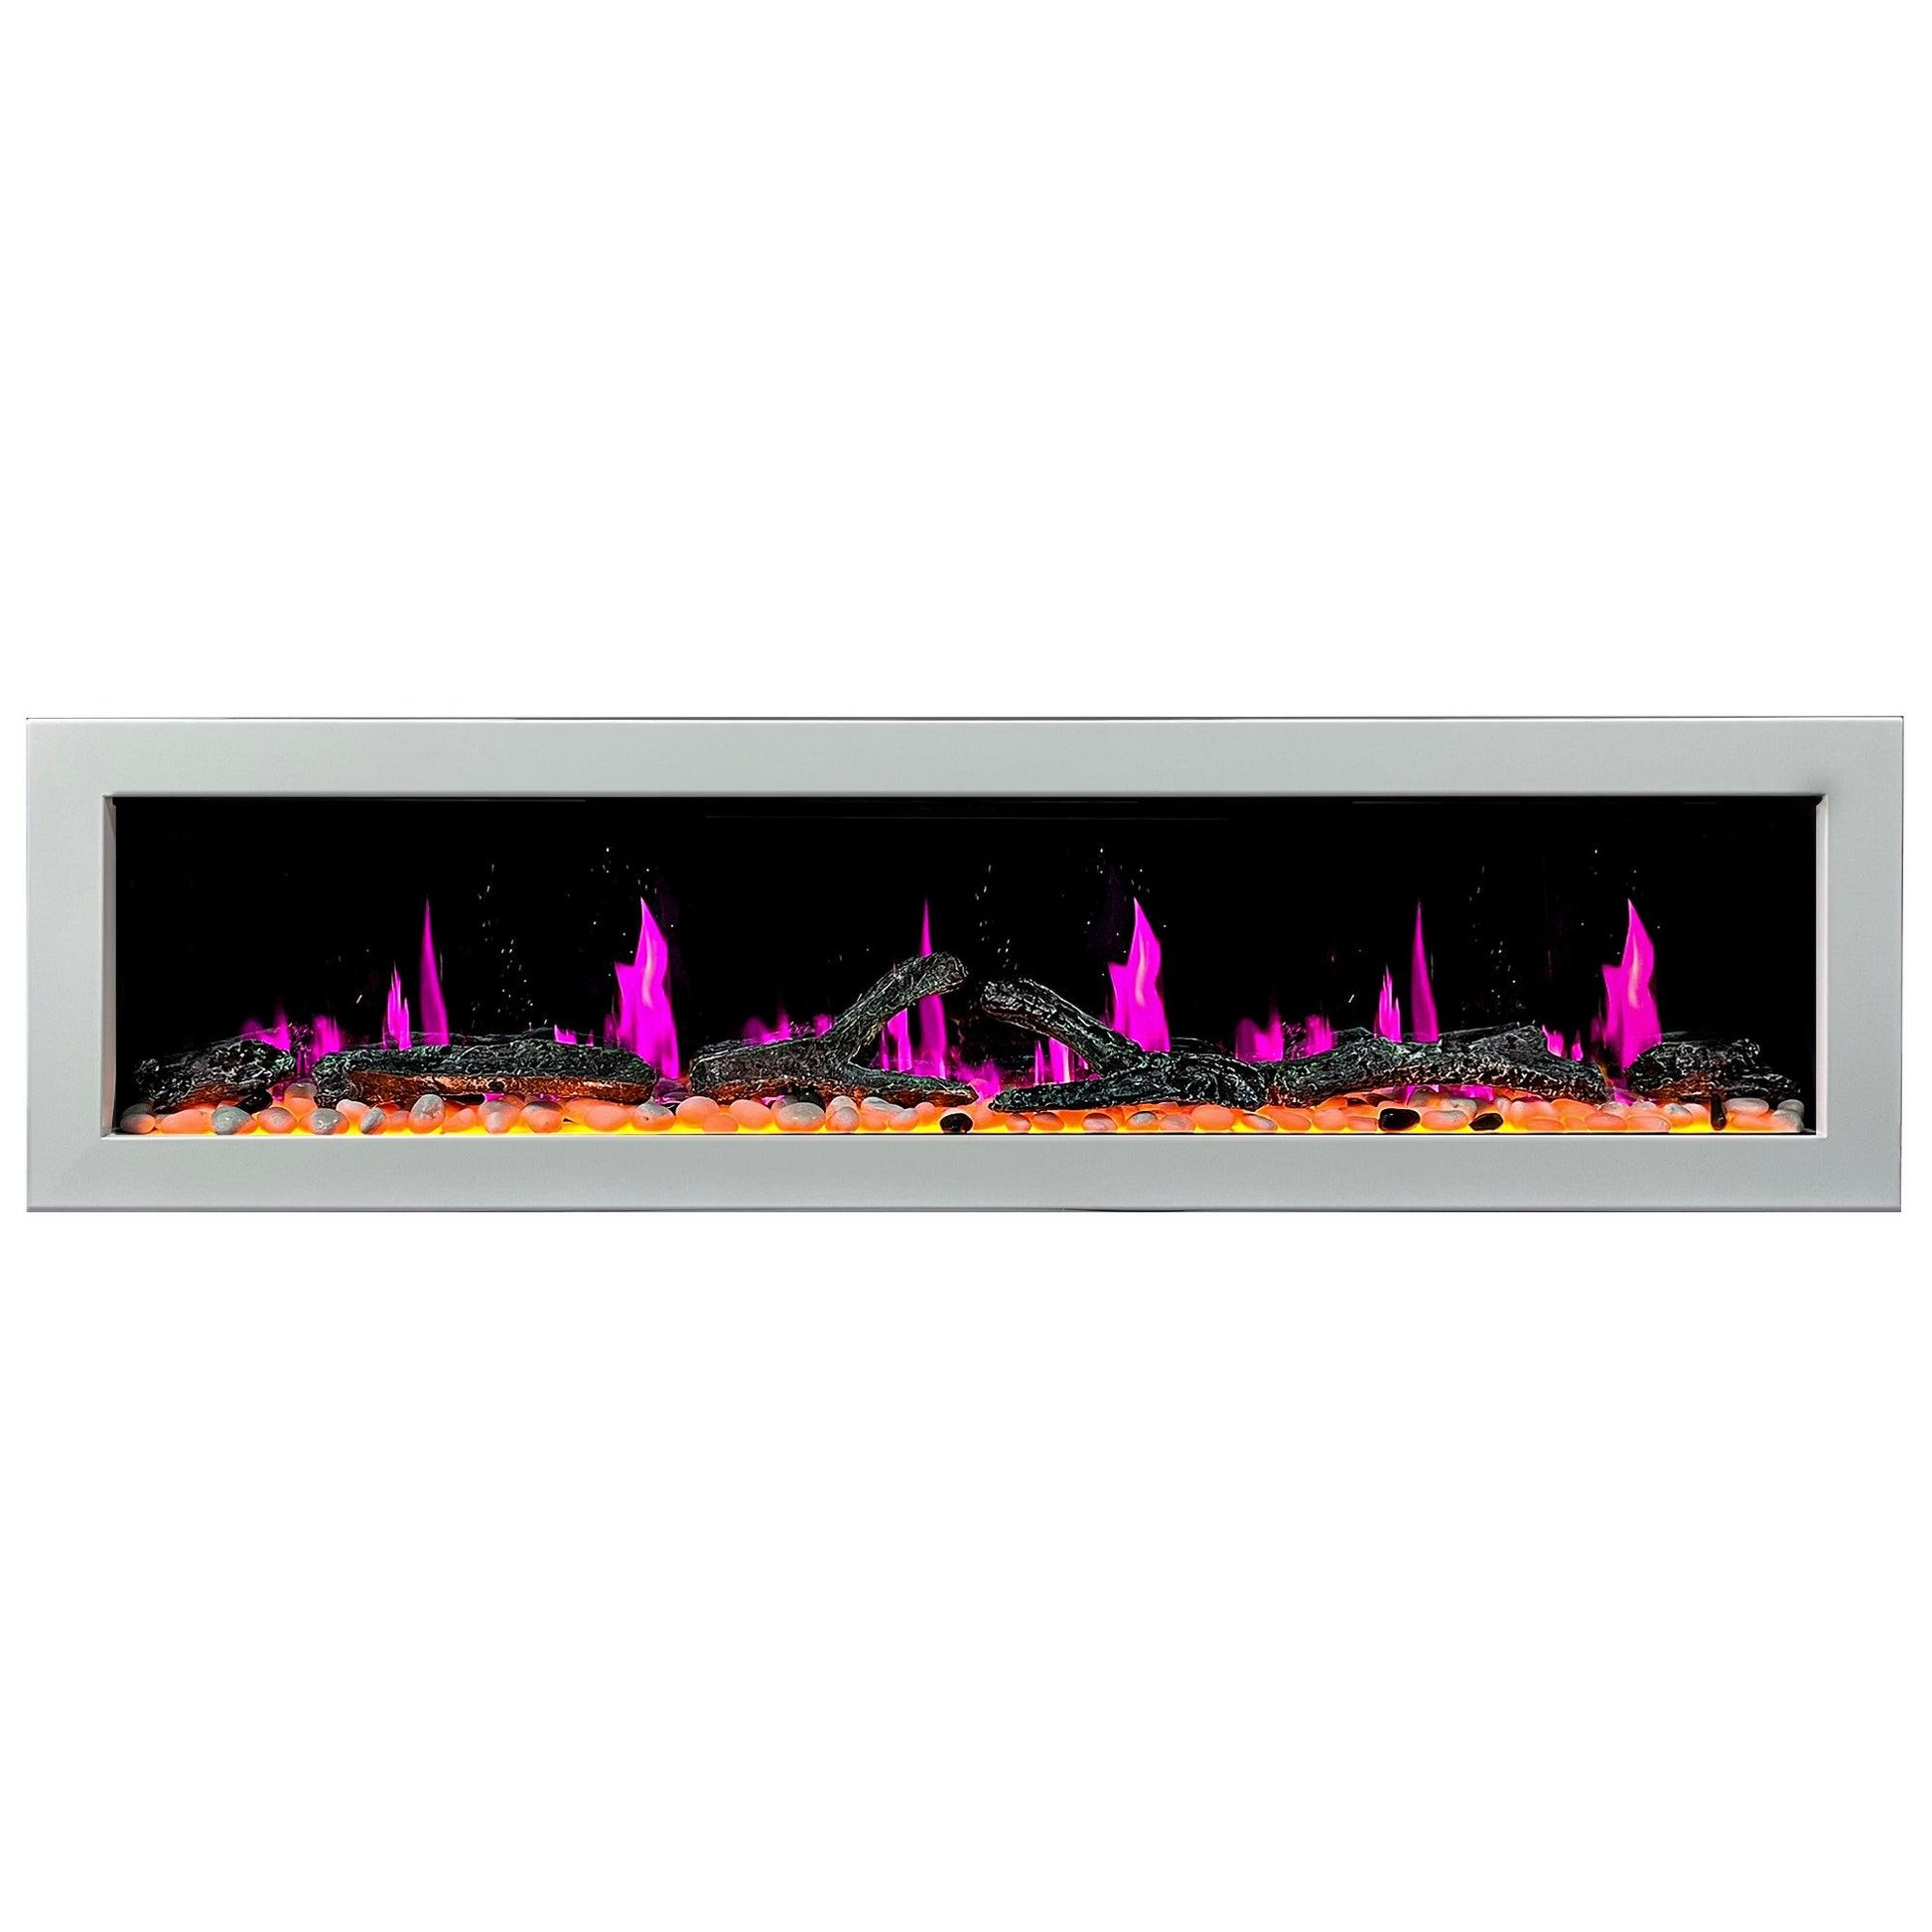 ZopaFlame™ 67" Linear Wall-mount Electric Fireplace - WP17688X - ZopaFlame Fireplaces